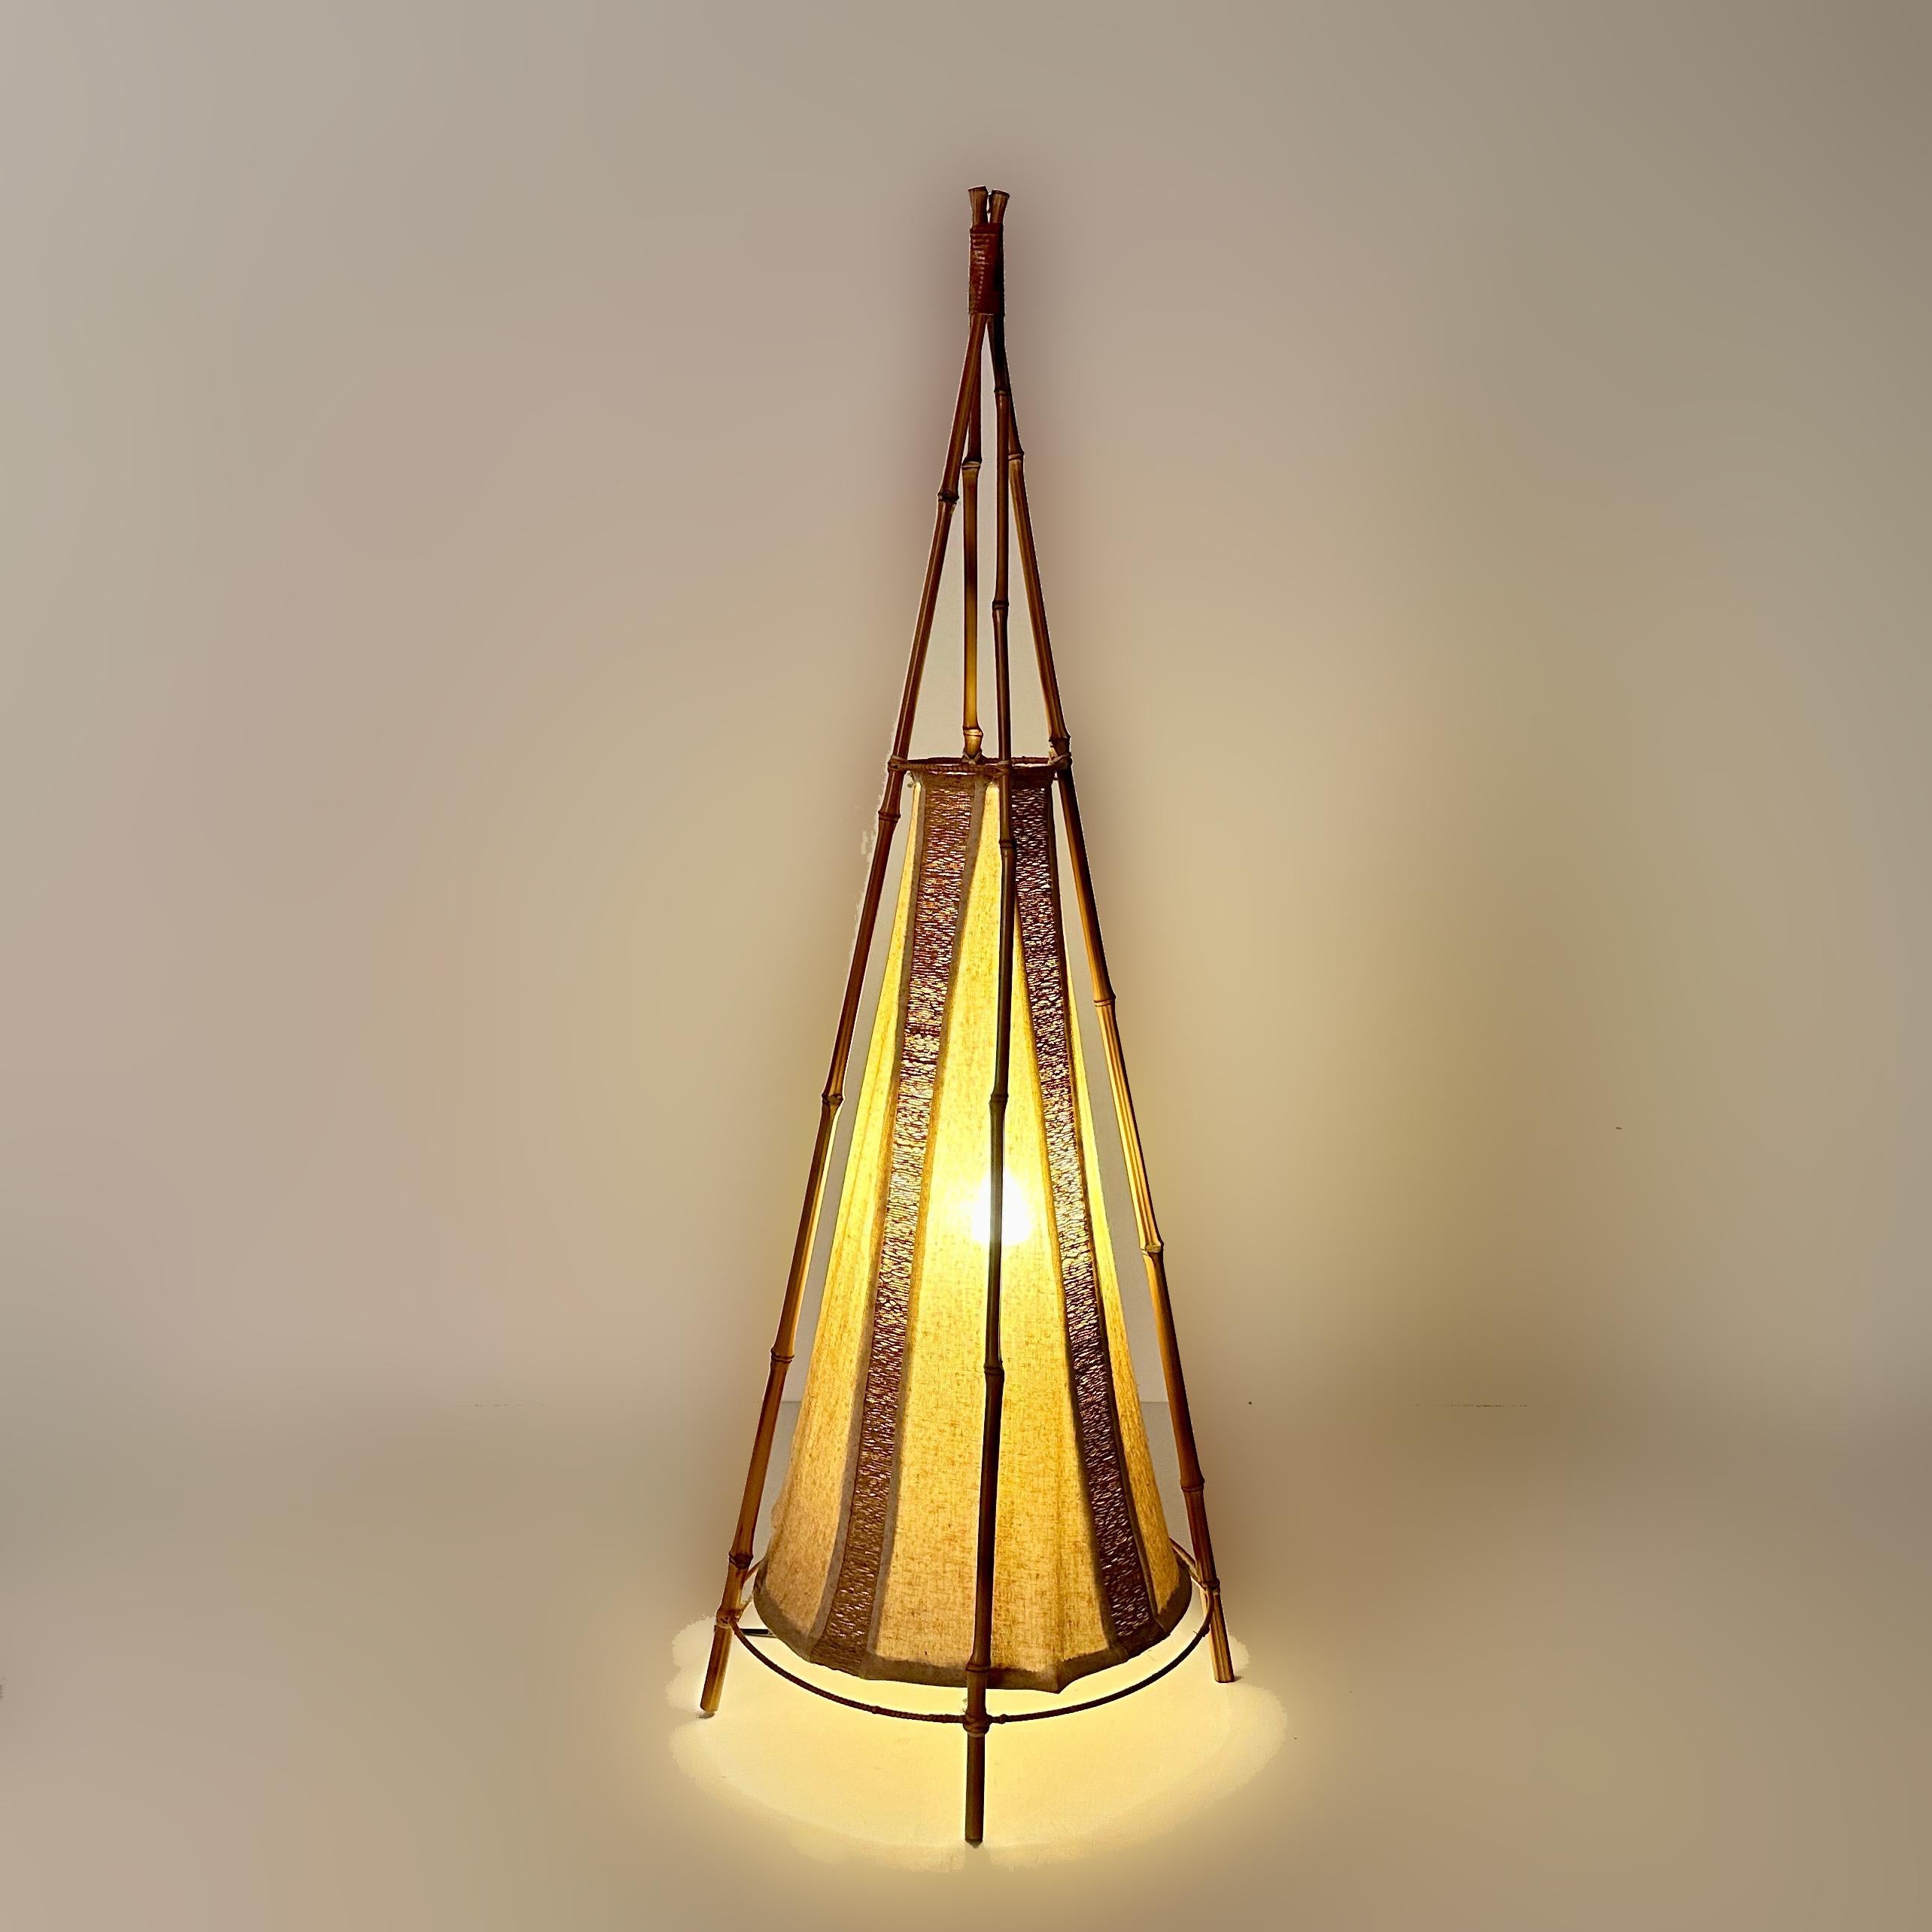 French Louis Sognot Midcentury Cotton, Bamboo and Rattan Italian Table Lamp, 1960s For Sale